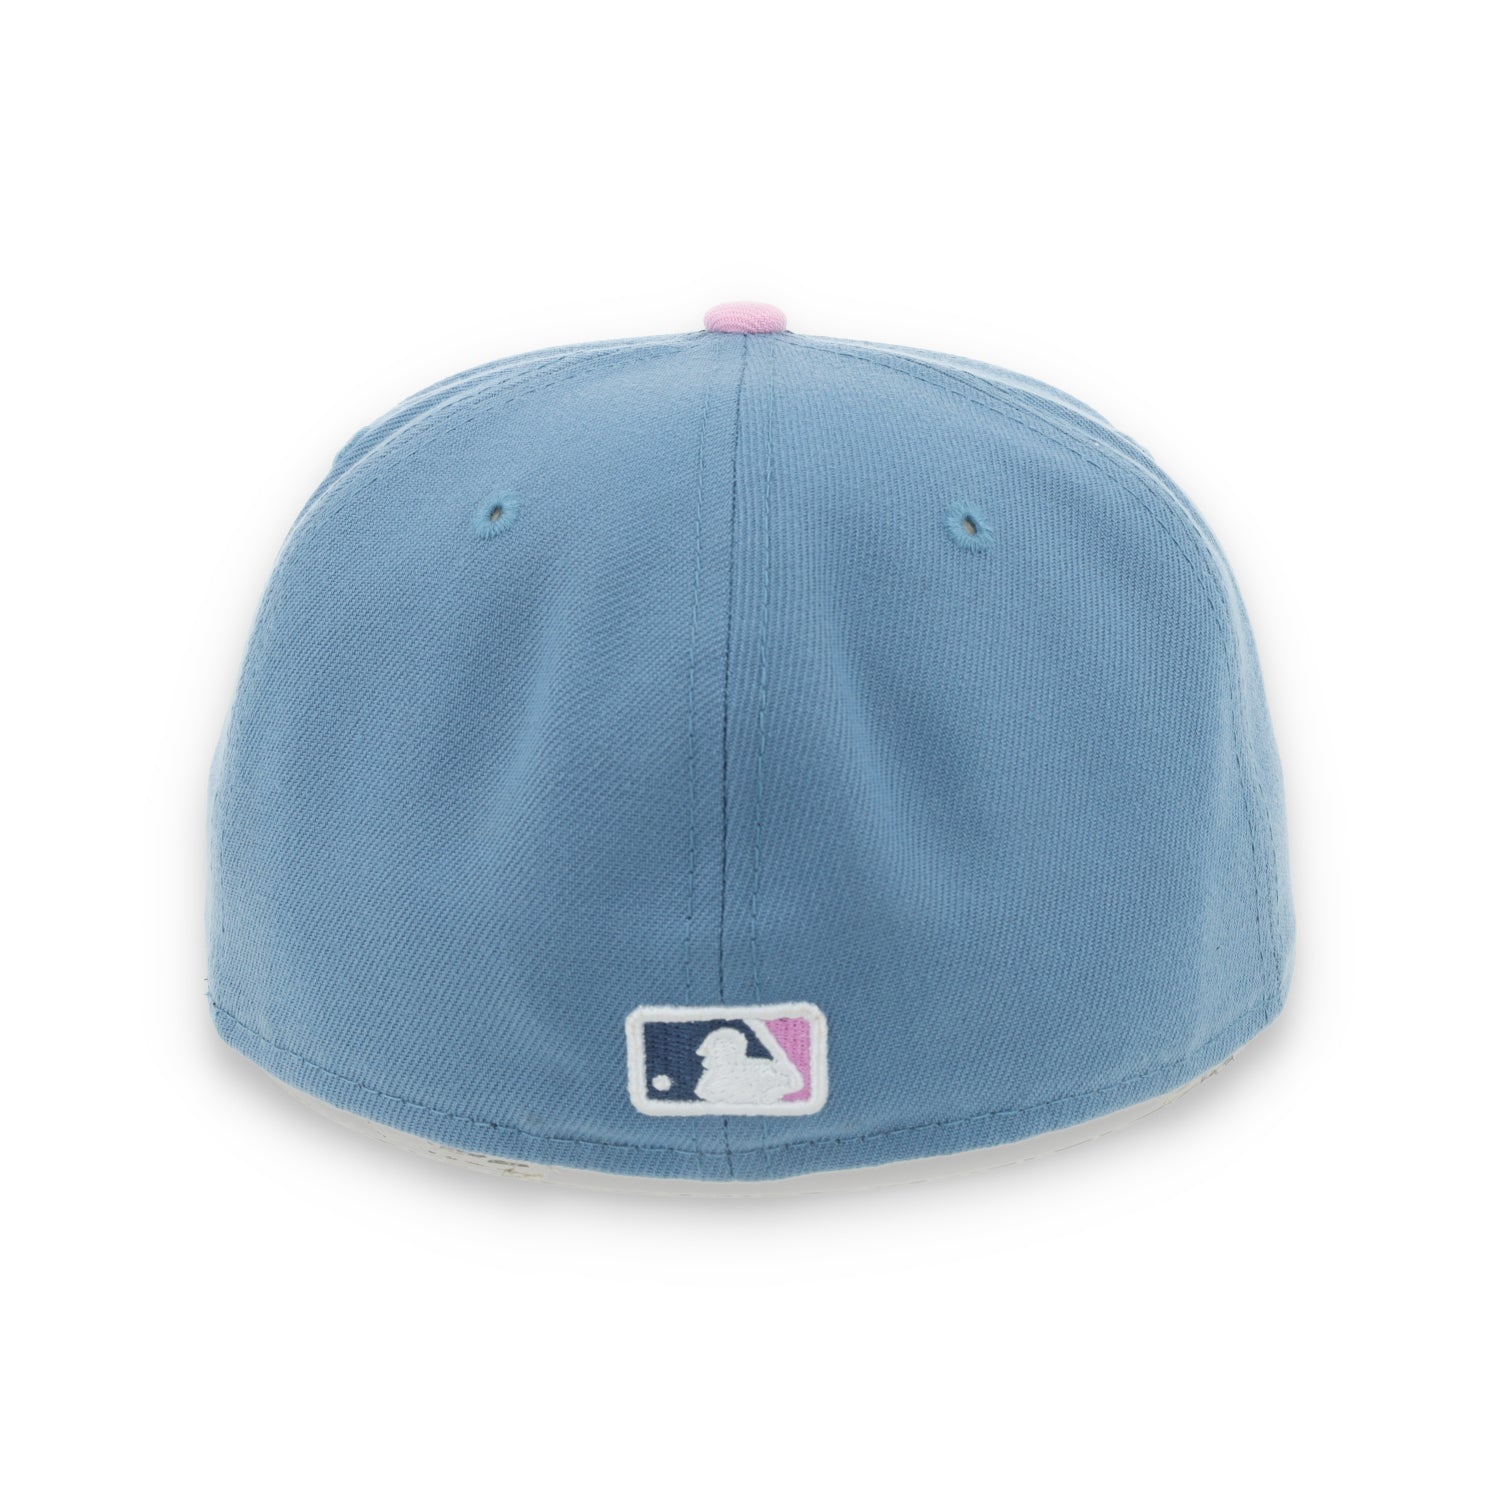 New Era  Los Angeles Dodgers Color Pack 59FIFTY Fitted Hat-Light Blue /Pink